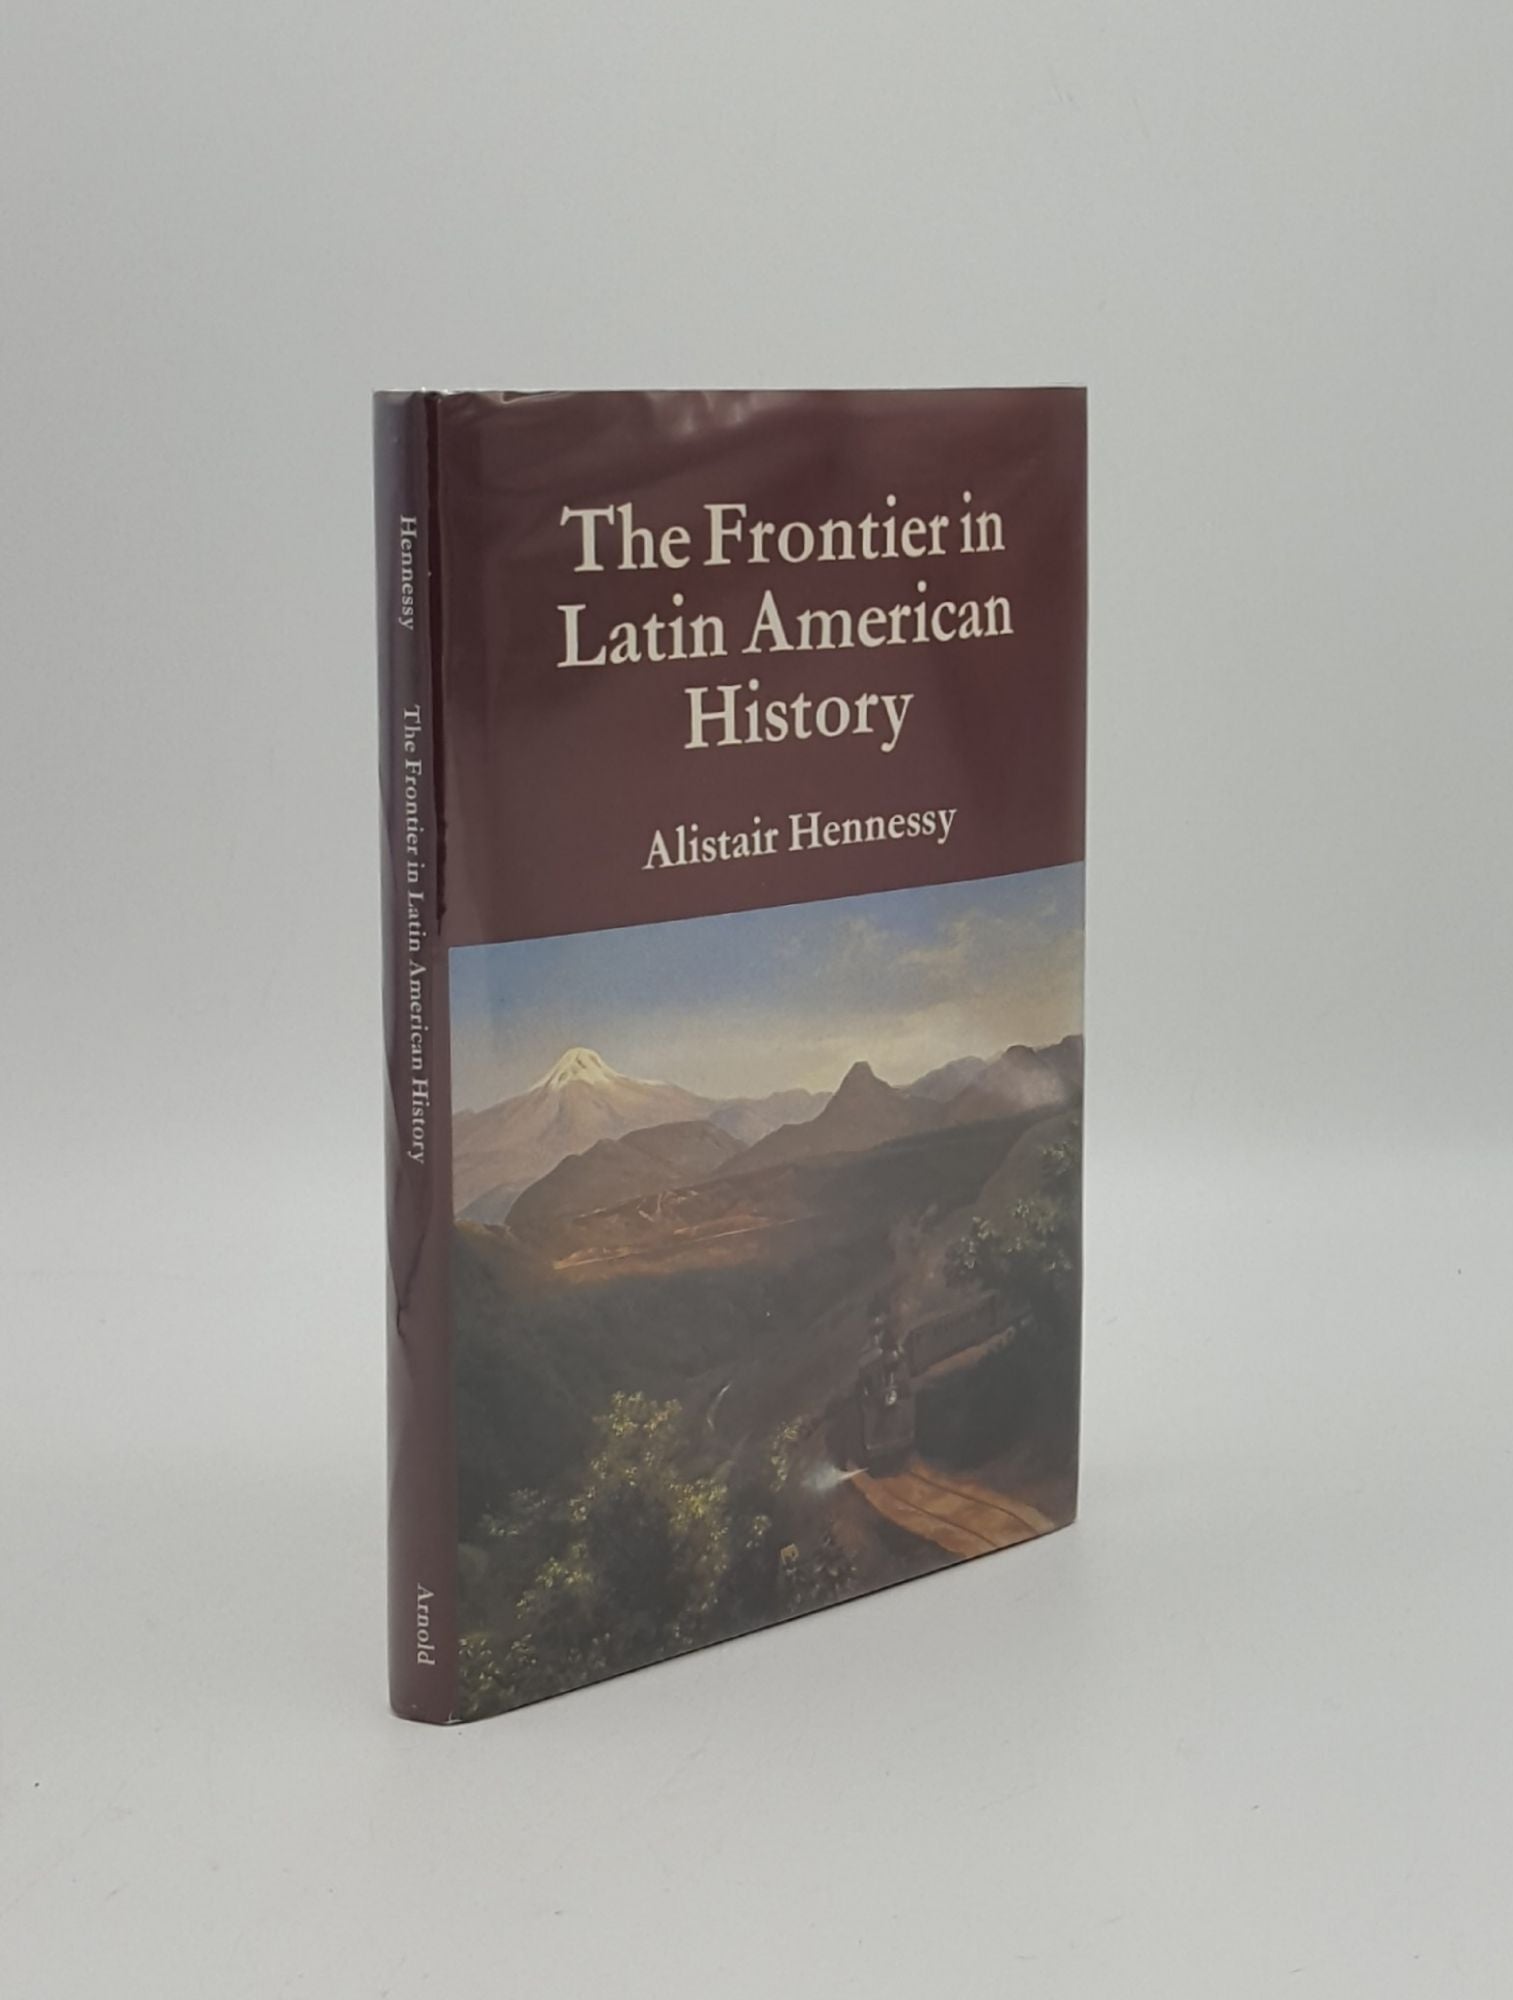 HENNESSY Alistair - The Frontier in Latin American History